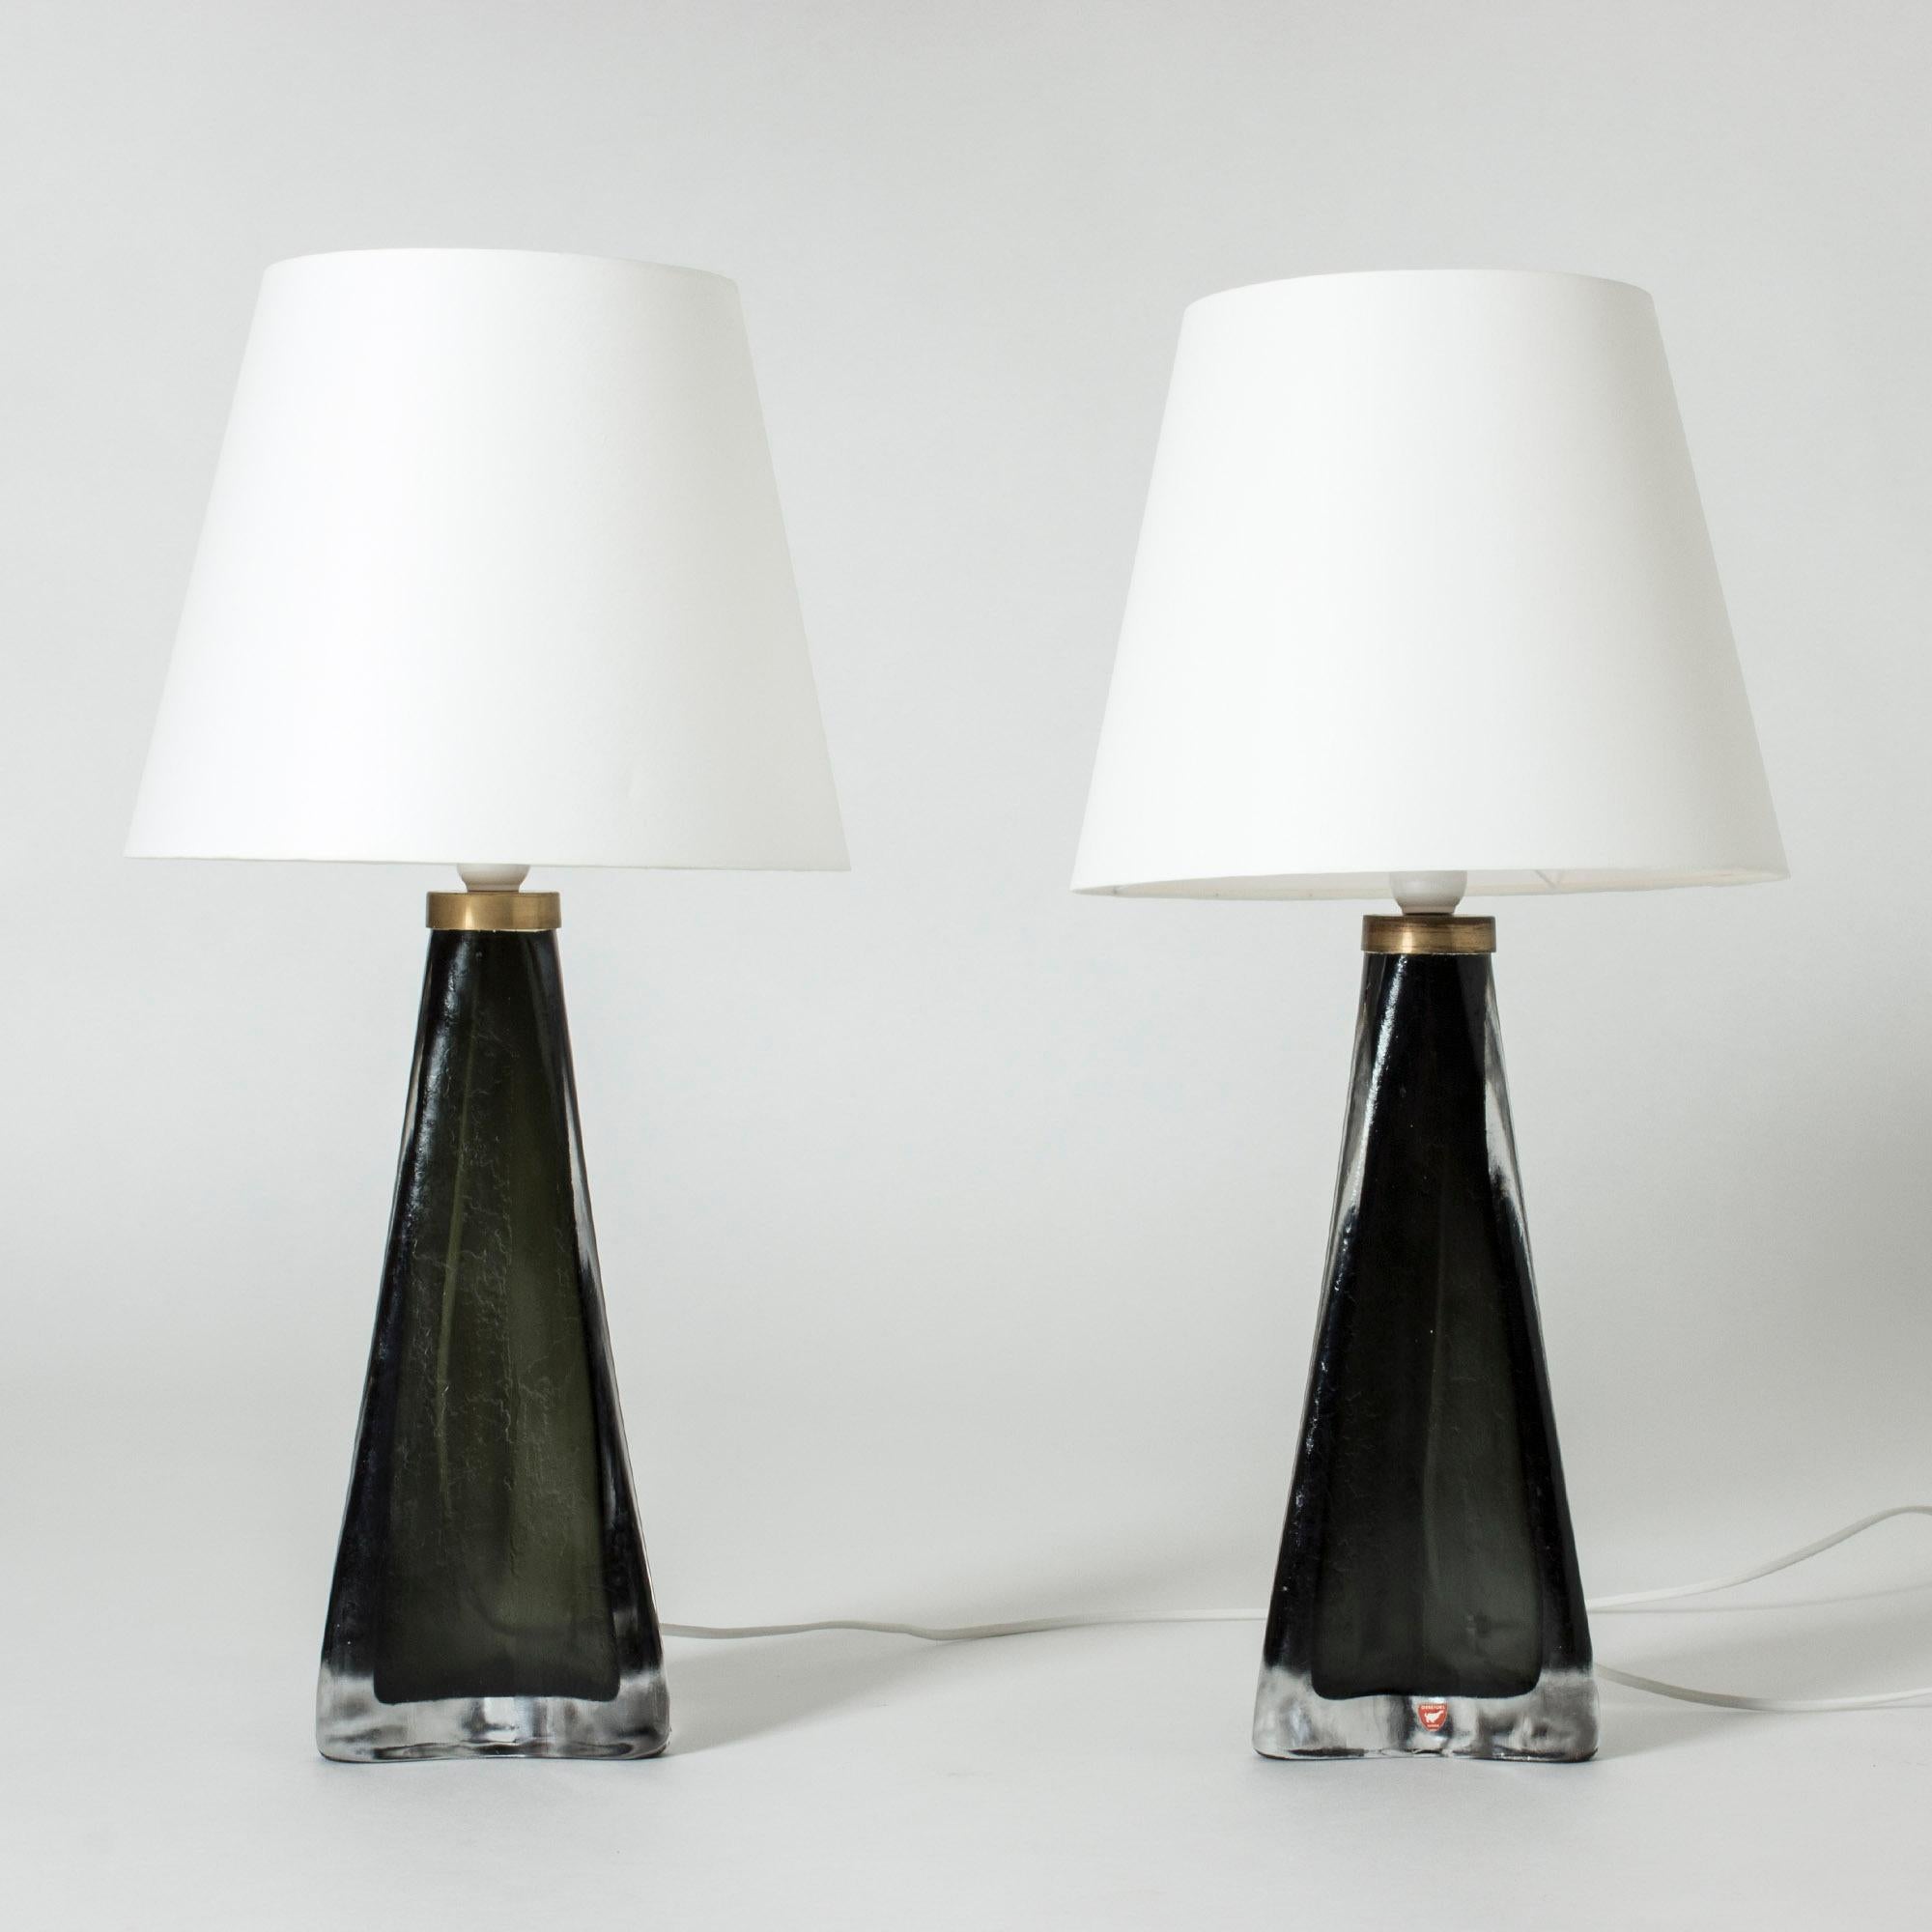 Pair of cool and luxurious table lamps by Carl Fagerlund, made in nearly opaque black and clear glass. Tapering shape with a triangular base. Slightly frosted surface with structure.